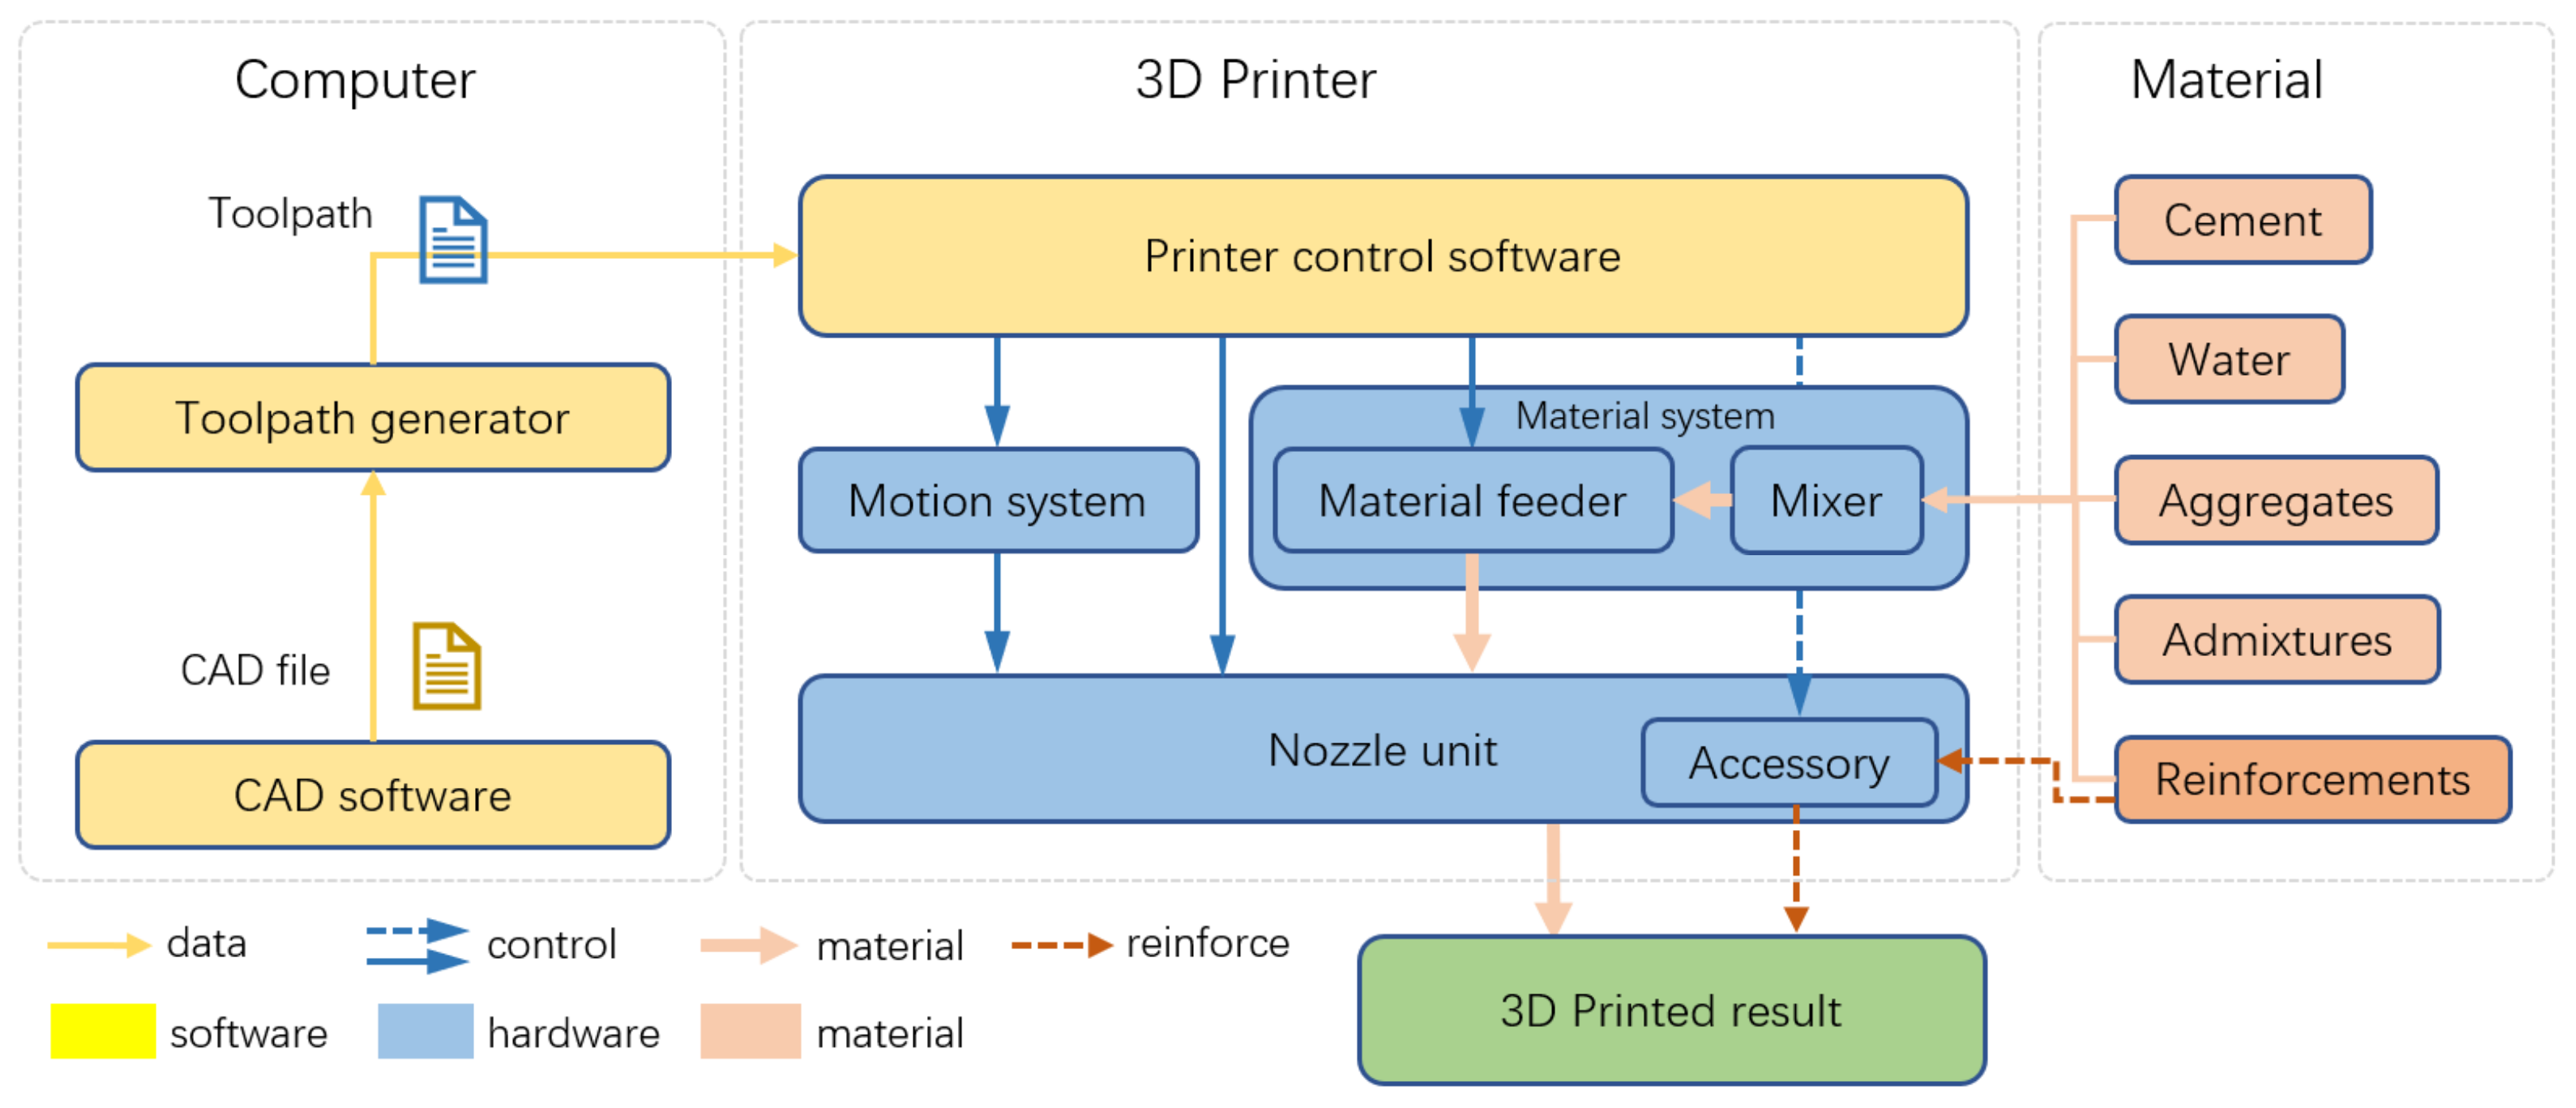 G-Code 101: Modify Your 3D Printing Files